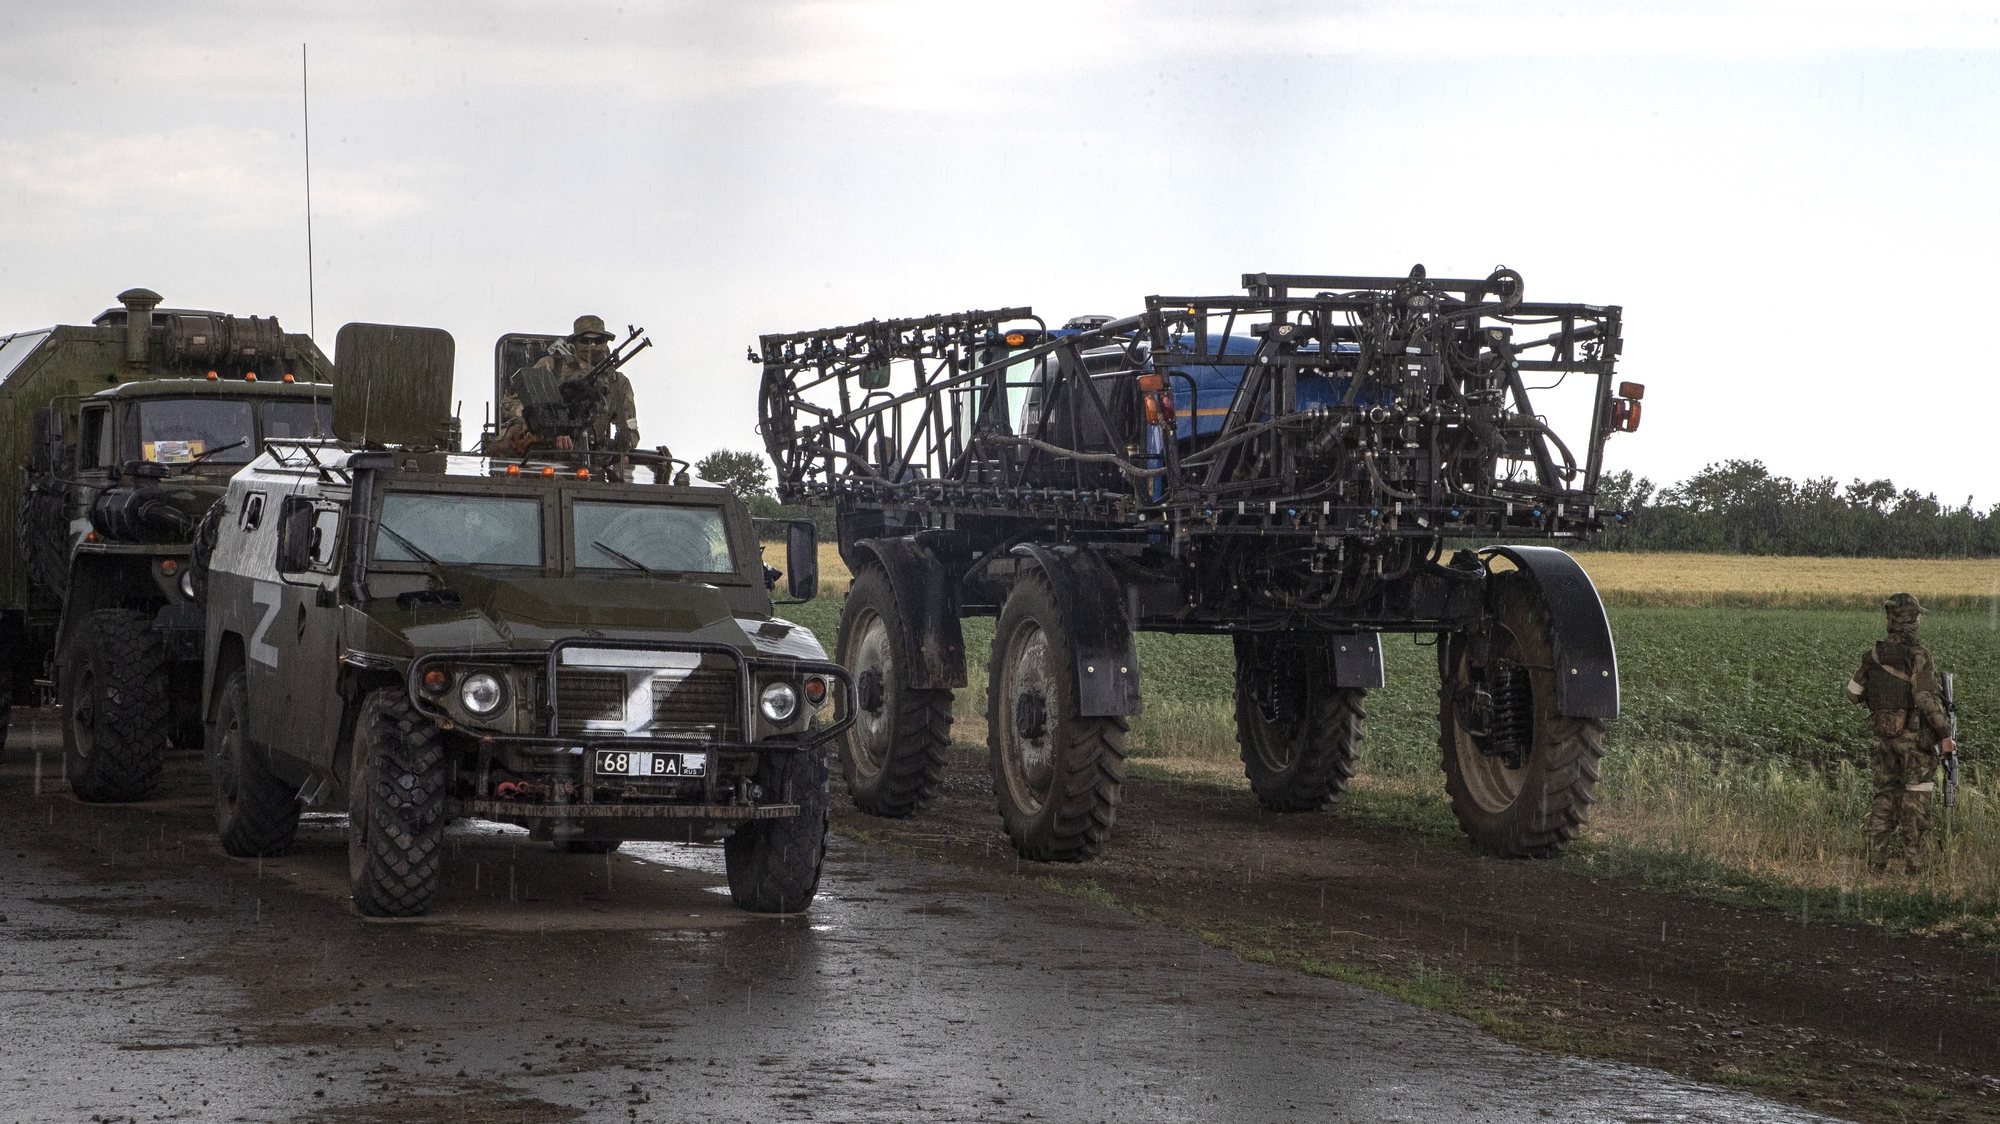 epa10013938 Russian servicemen and their vehicles seen near an agricultural tractor in front of a wheat field near Melitopol, Zaporizhia region, Ukraine, 14 June 2022 (Issued on 15 June 2022). The conflict in Ukraine has affected the availability and price of wheat worldwide. The Food and Agriculture Organization (FAO) of the United Nations said in its 10 June note assessing the risks emanating from the conflict in Ukraine that &#039;the current war raises concerns over whether crops will be harvested. It has already led to the closures of ports and oilseed crushing operations, affecting products intended for the export markets&#039;. These are taking a toll on the country&#039;s exports of grains and vegetable oils. The city of Melitopol is located on the territory controlled by the troops of the Russian Federation and the city is administered by the Military-Civilian Administration controlled by Russia. On 24 February 2022 Russian troops entered the Ukrainian territory in what the Russian president declared a &#039;Special Military Operation&#039;, starting an armed conflict that has provoked destruction and a humanitarian crisis.  EPA/SERGEI ILNITSKY